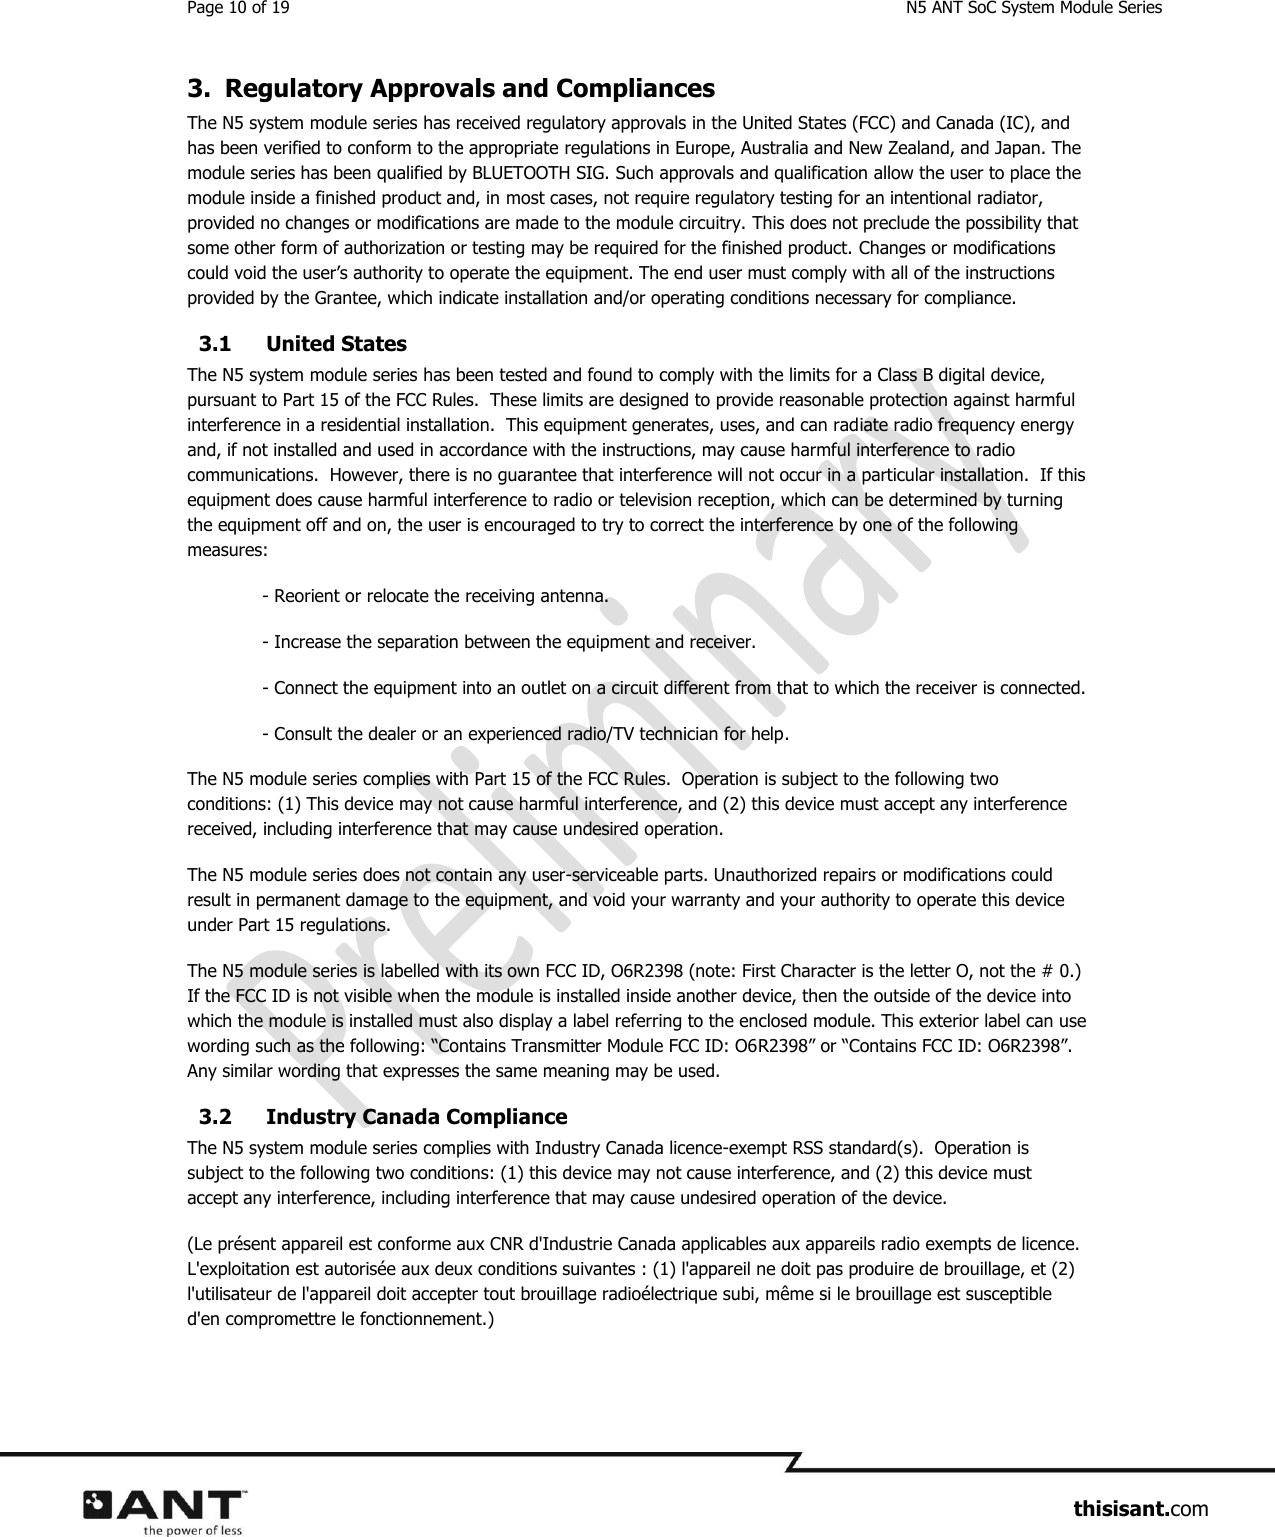 Page 10 of 19  N5 ANT SoC System Module Series                     thisisant.com 3. Regulatory Approvals and Compliances The N5 system module series has received regulatory approvals in the United States (FCC) and Canada (IC), and has been verified to conform to the appropriate regulations in Europe, Australia and New Zealand, and Japan. The module series has been qualified by BLUETOOTH SIG. Such approvals and qualification allow the user to place the module inside a finished product and, in most cases, not require regulatory testing for an intentional radiator, provided no changes or modifications are made to the module circuitry. This does not preclude the possibility that some other form of authorization or testing may be required for the finished product. Changes or modifications could void the user’s authority to operate the equipment. The end user must comply with all of the instructions provided by the Grantee, which indicate installation and/or operating conditions necessary for compliance. 3.1 United States The N5 system module series has been tested and found to comply with the limits for a Class B digital device, pursuant to Part 15 of the FCC Rules.  These limits are designed to provide reasonable protection against harmful interference in a residential installation.  This equipment generates, uses, and can radiate radio frequency energy and, if not installed and used in accordance with the instructions, may cause harmful interference to radio communications.  However, there is no guarantee that interference will not occur in a particular installation.  If this equipment does cause harmful interference to radio or television reception, which can be determined by turning the equipment off and on, the user is encouraged to try to correct the interference by one of the following measures: - Reorient or relocate the receiving antenna. - Increase the separation between the equipment and receiver. - Connect the equipment into an outlet on a circuit different from that to which the receiver is connected. - Consult the dealer or an experienced radio/TV technician for help. The N5 module series complies with Part 15 of the FCC Rules.  Operation is subject to the following two conditions: (1) This device may not cause harmful interference, and (2) this device must accept any interference received, including interference that may cause undesired operation. The N5 module series does not contain any user-serviceable parts. Unauthorized repairs or modifications could result in permanent damage to the equipment, and void your warranty and your authority to operate this device under Part 15 regulations. The N5 module series is labelled with its own FCC ID, O6R2398 (note: First Character is the letter O, not the # 0.) If the FCC ID is not visible when the module is installed inside another device, then the outside of the device into which the module is installed must also display a label referring to the enclosed module. This exterior label can use wording such as the following: “Contains Transmitter Module FCC ID: O6R2398” or “Contains FCC ID: O6R2398”. Any similar wording that expresses the same meaning may be used. 3.2 Industry Canada Compliance The N5 system module series complies with Industry Canada licence-exempt RSS standard(s).  Operation is subject to the following two conditions: (1) this device may not cause interference, and (2) this device must accept any interference, including interference that may cause undesired operation of the device. (Le présent appareil est conforme aux CNR d&apos;Industrie Canada applicables aux appareils radio exempts de licence.  L&apos;exploitation est autorisée aux deux conditions suivantes : (1) l&apos;appareil ne doit pas produire de brouillage, et (2) l&apos;utilisateur de l&apos;appareil doit accepter tout brouillage radioélectrique subi, même si le brouillage est susceptible d&apos;en compromettre le fonctionnement.) 